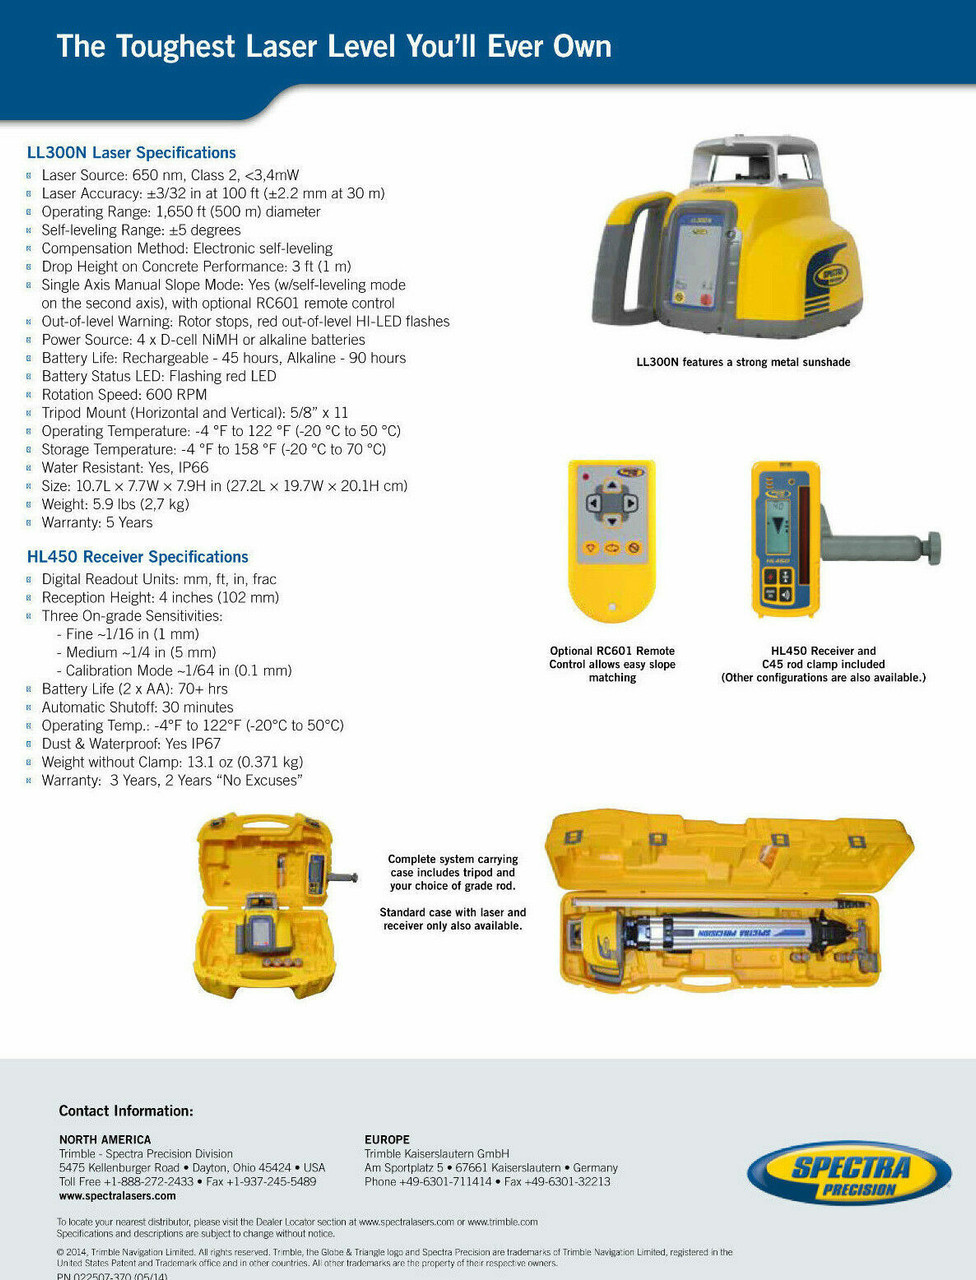 Spectra Precision LL300N-8 Self Leveling Laser Level with HR320 Receiver